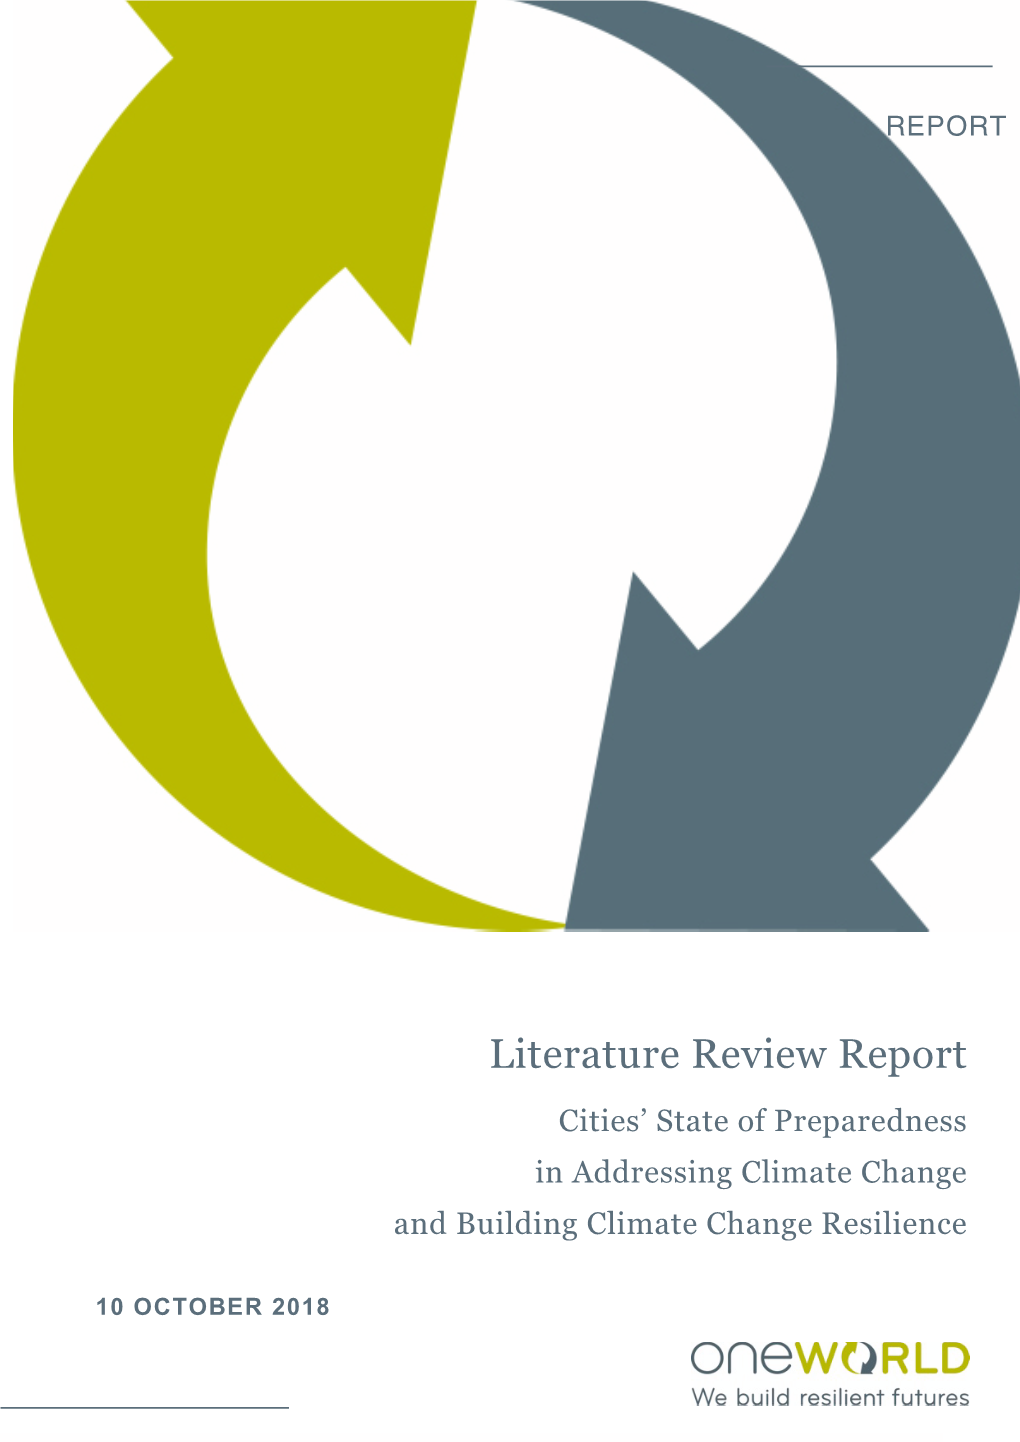 Literature Review Report Cities’ State of Preparedness in Addressing Climate Change and Building Climate Change Resilience